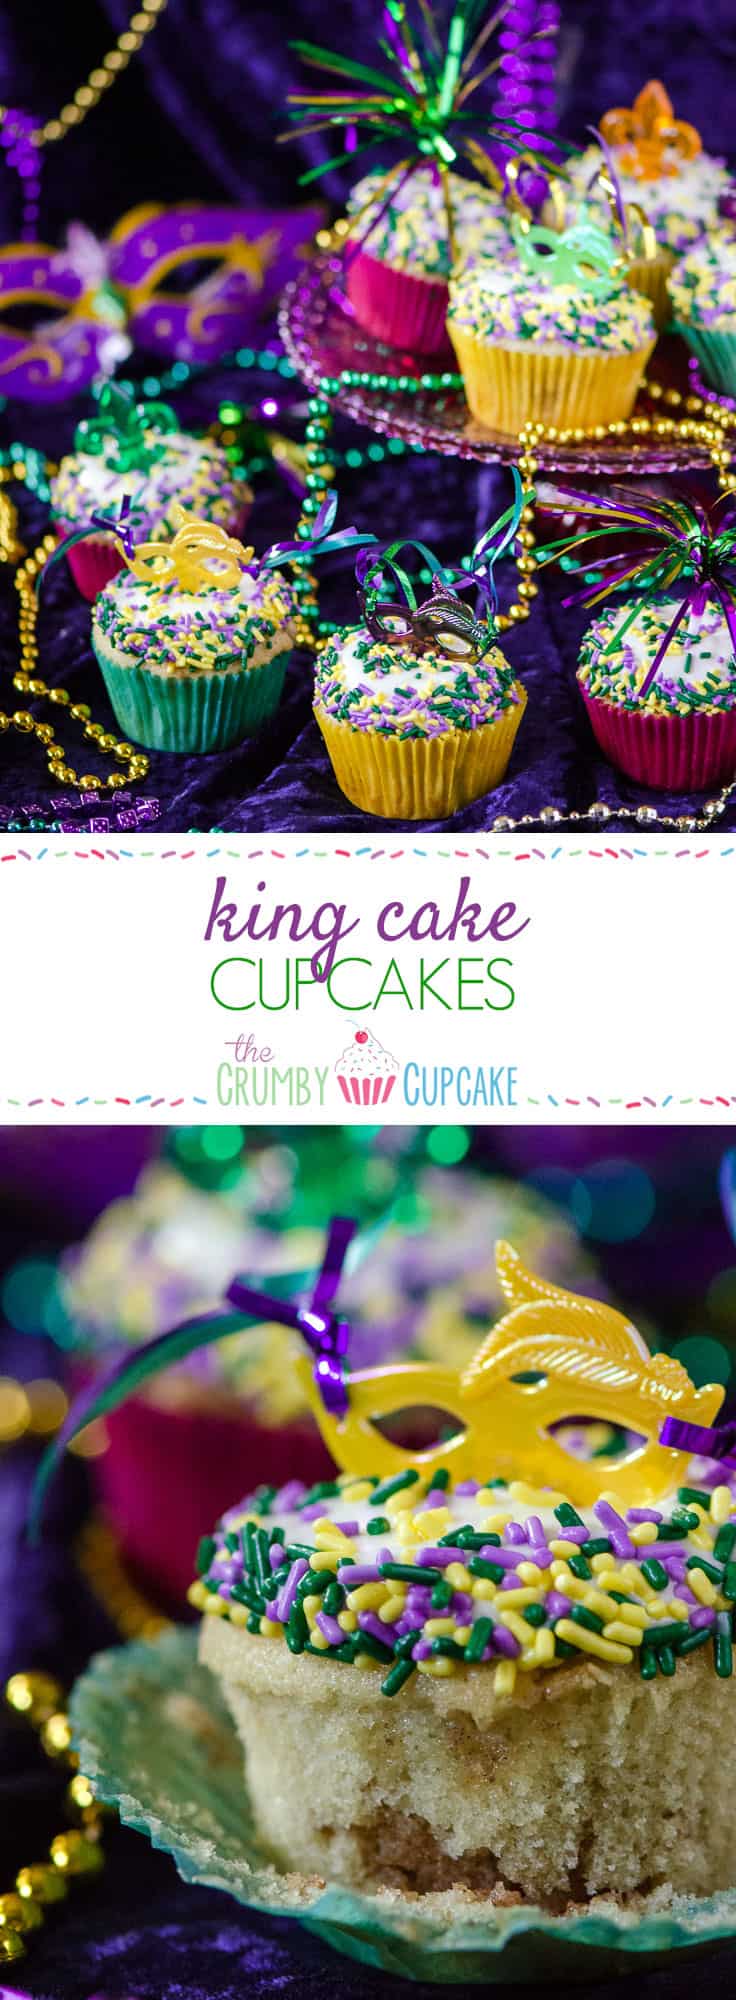 King Cake Cupcakes - The Crumby Kitchen